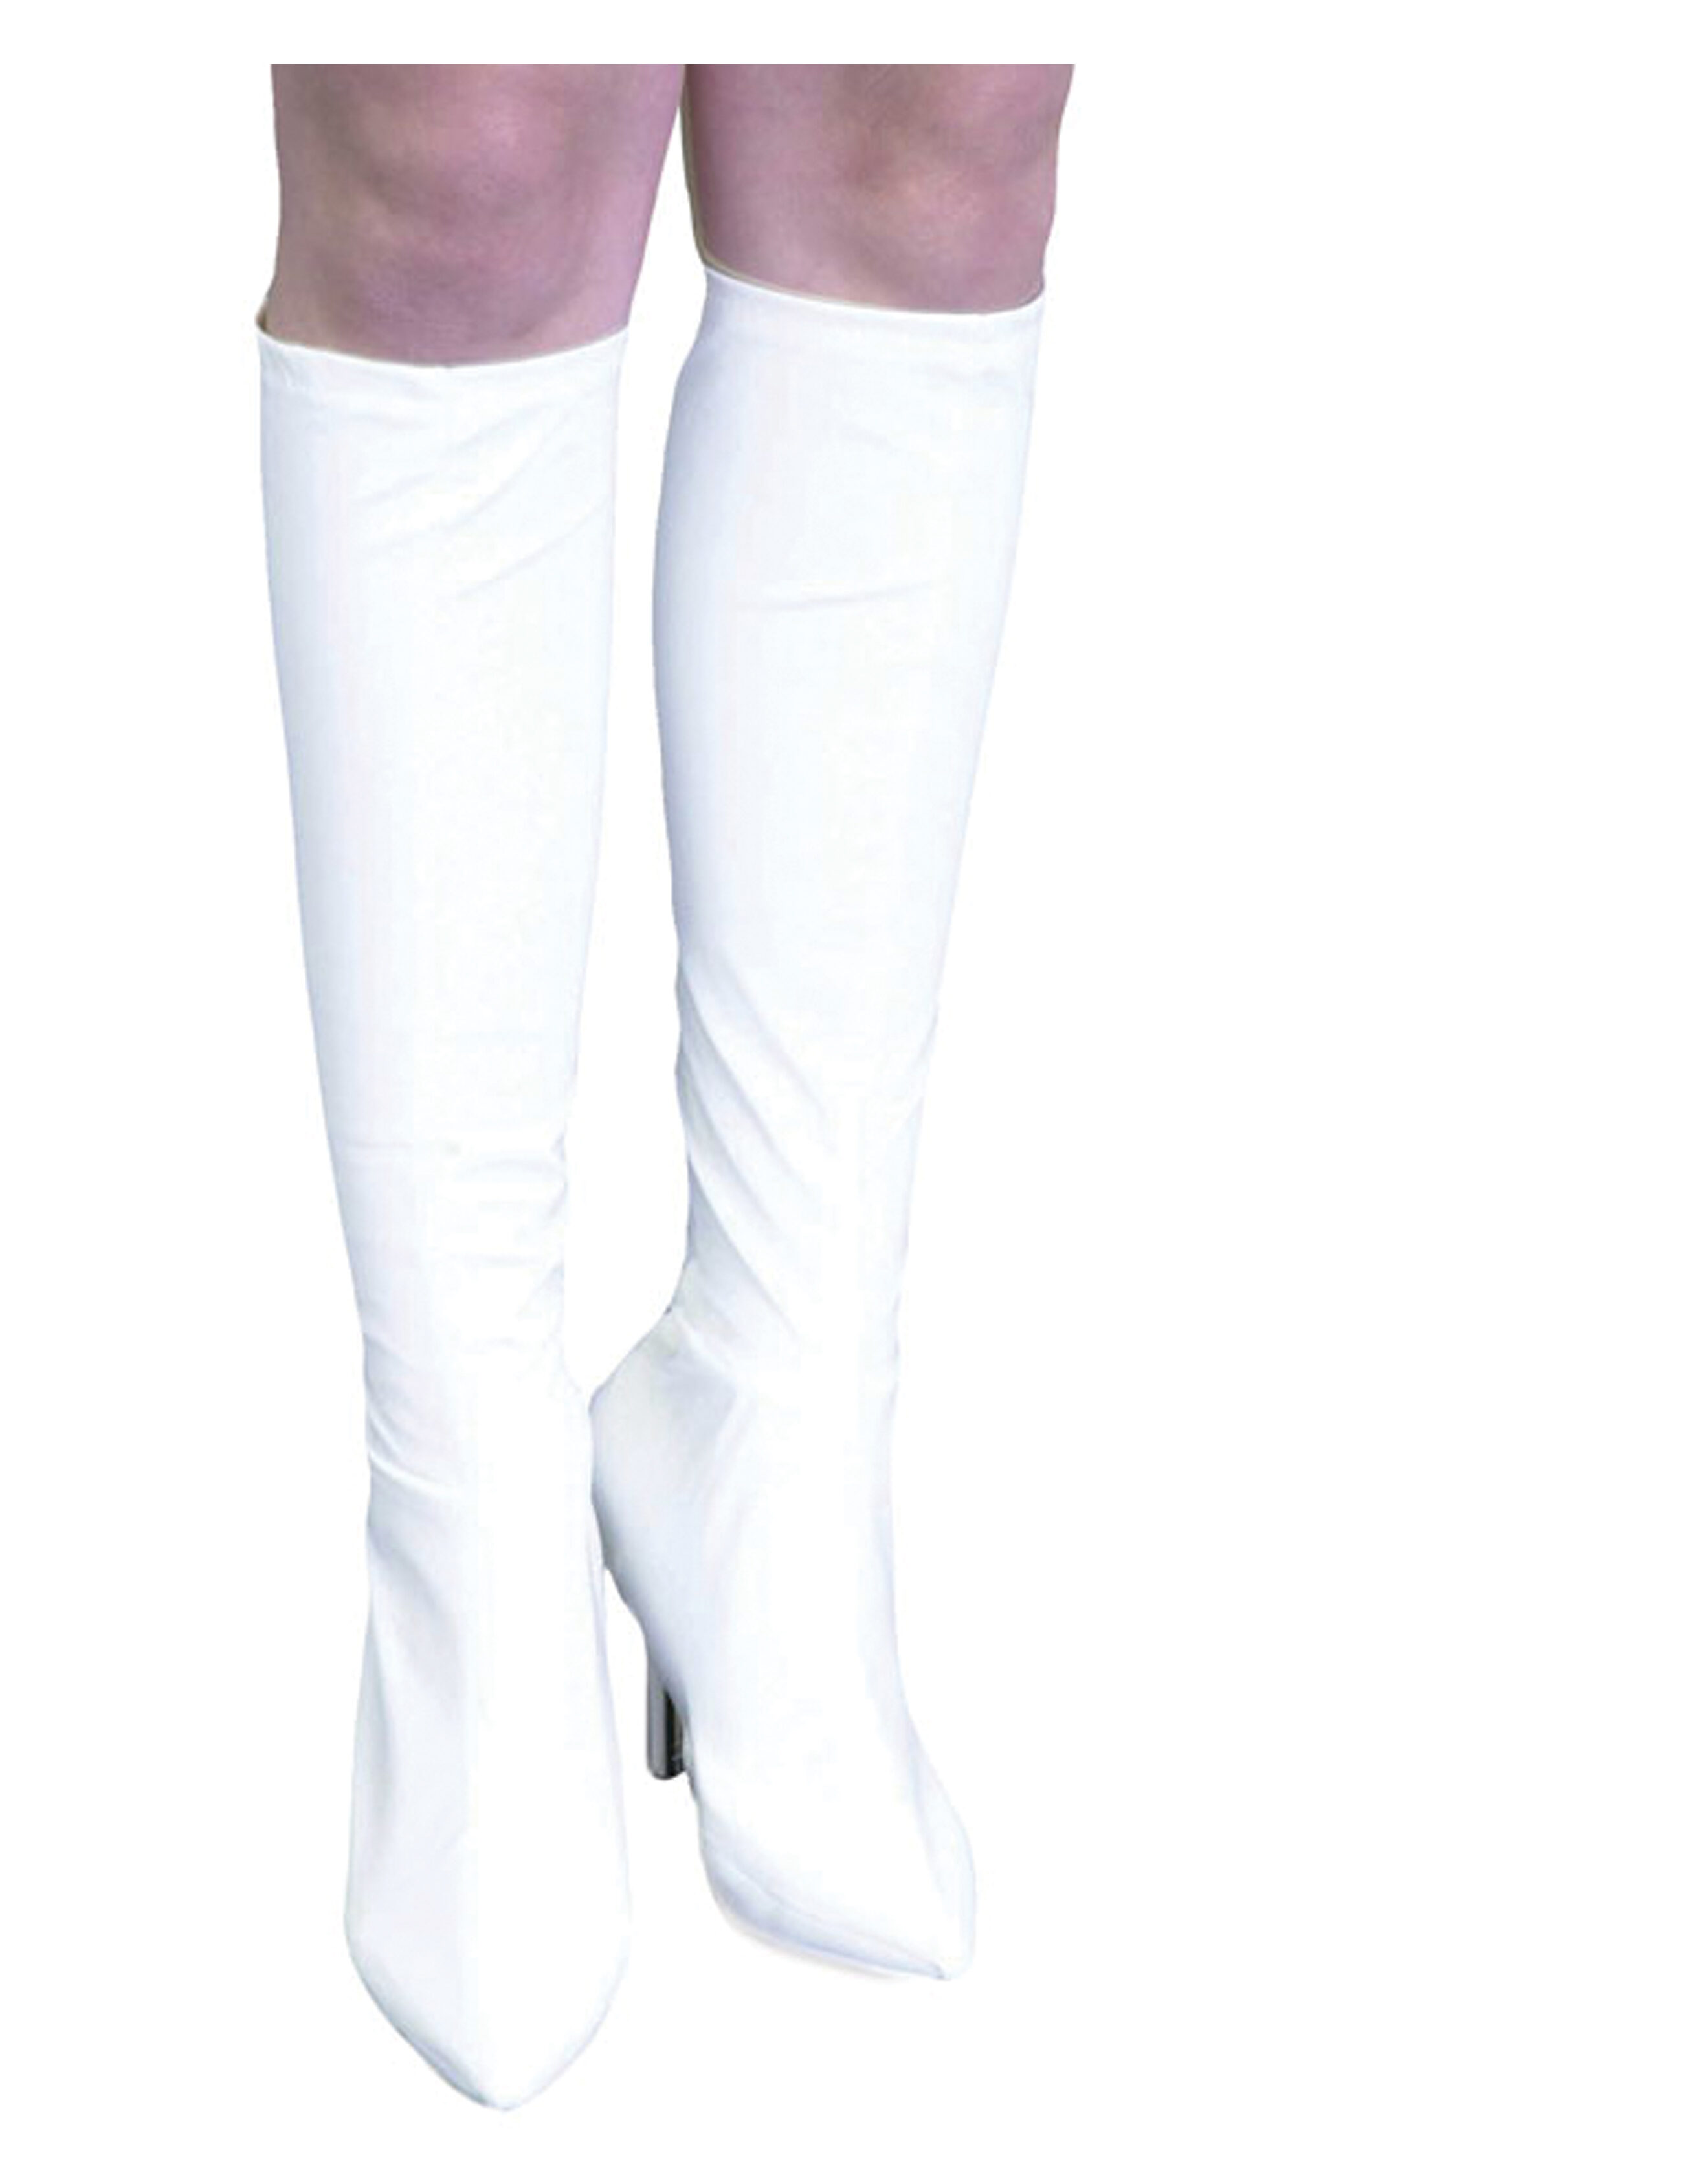 White Knee High Leather Boot Covers 